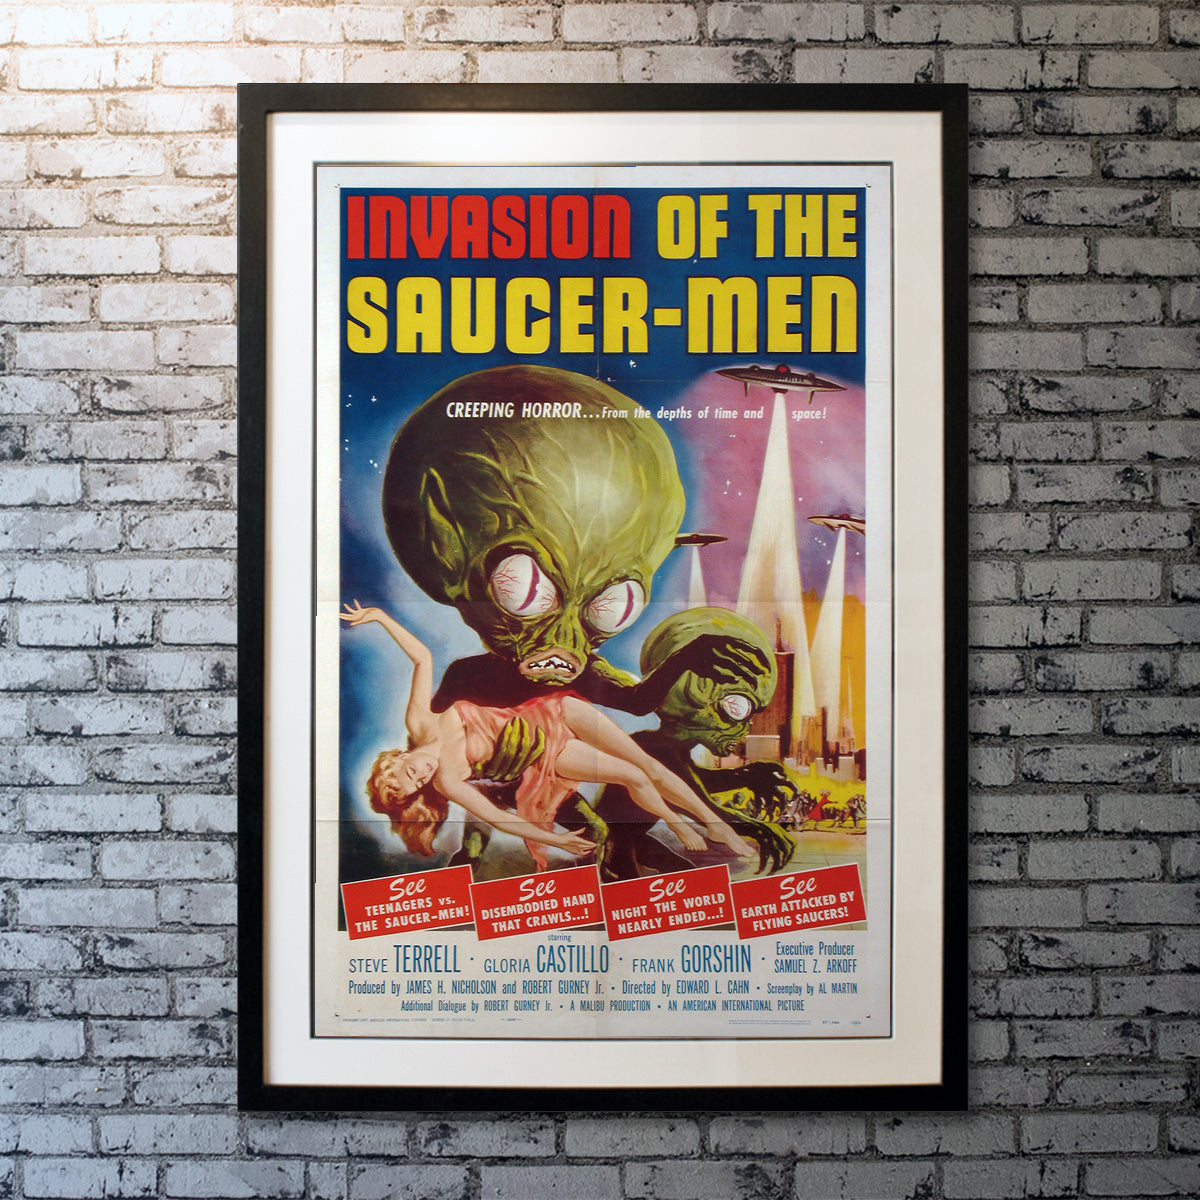 Invasion Of The Saucer Men (1957)